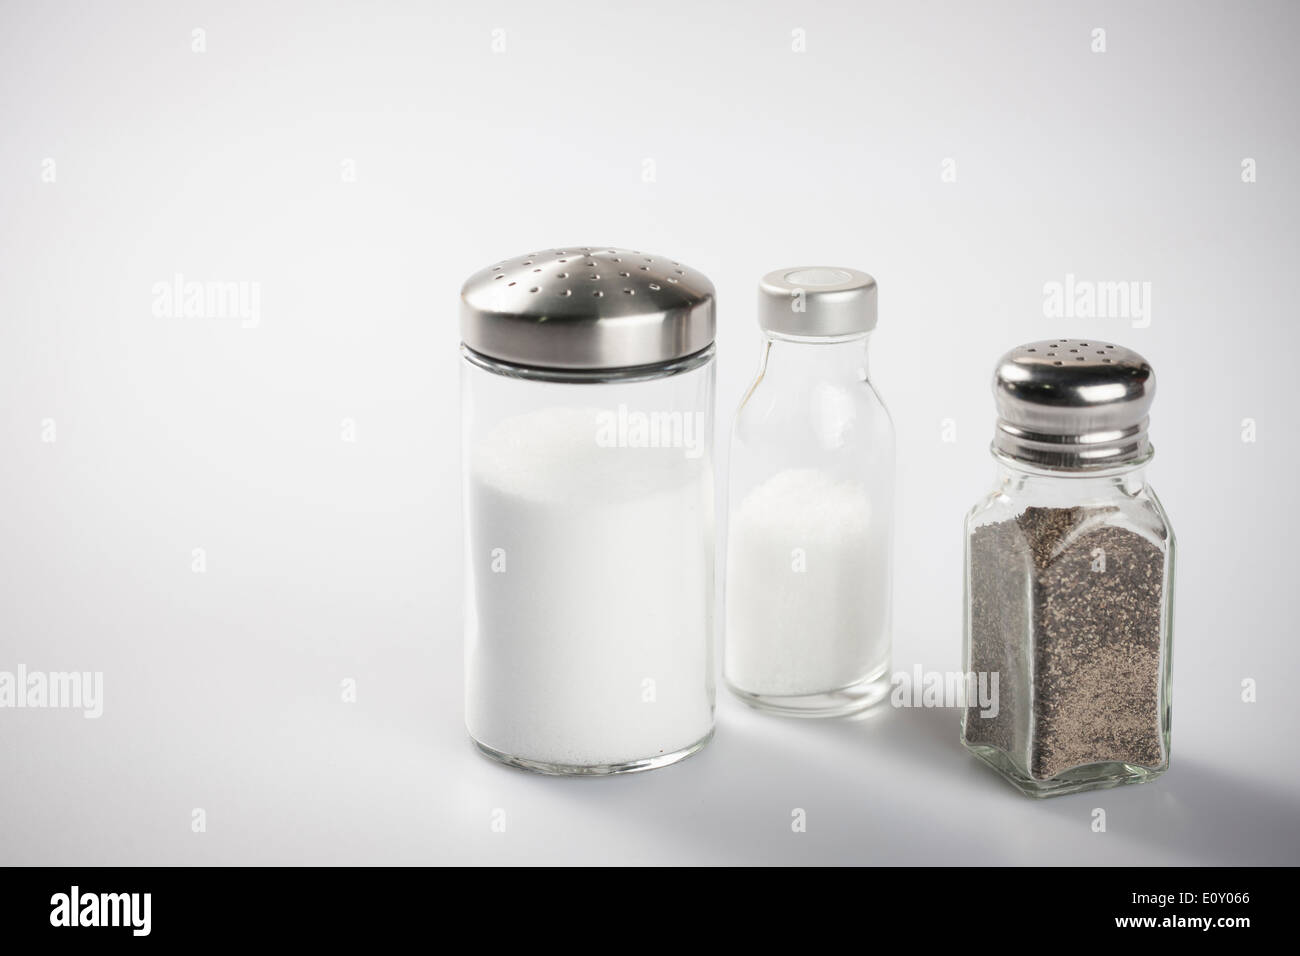 salt, pepper and sugar shakers Stock Photo